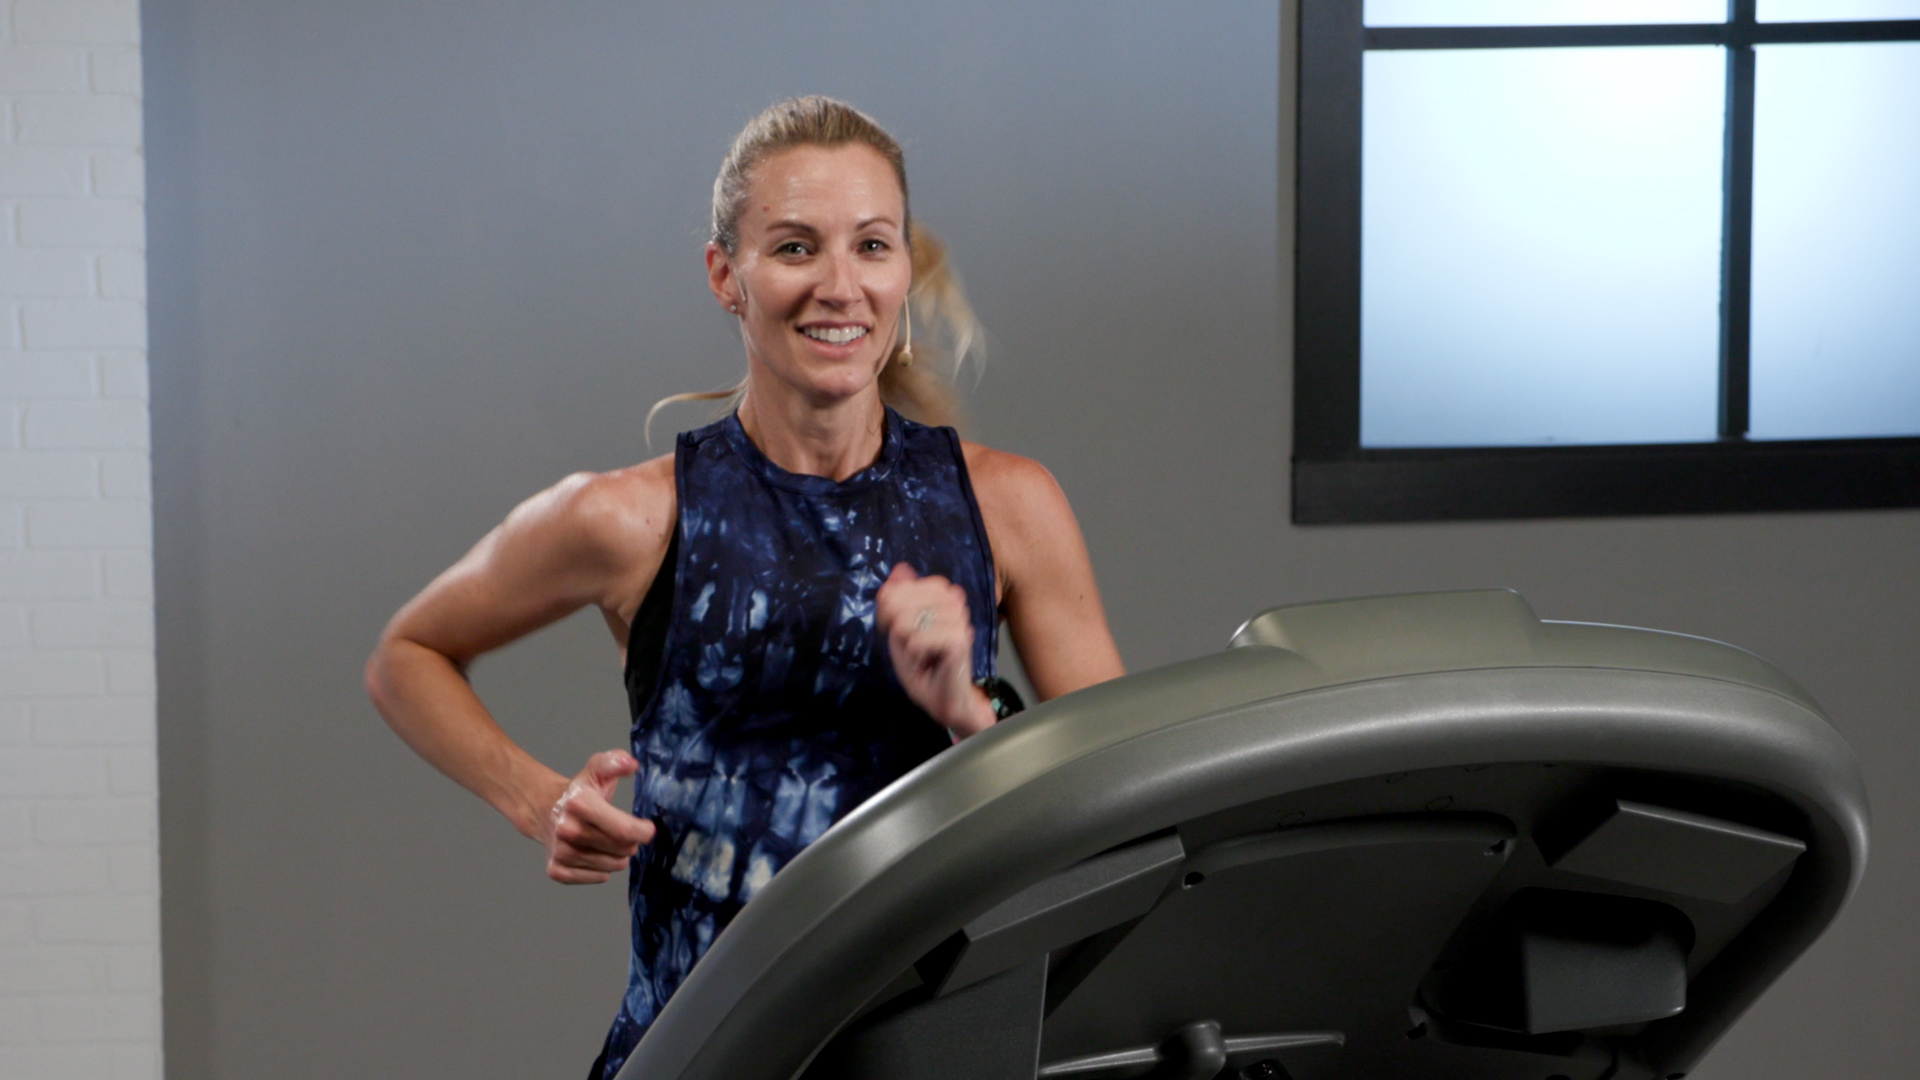 Wellbeats instructor Carrie T smiles while running on a treadmill